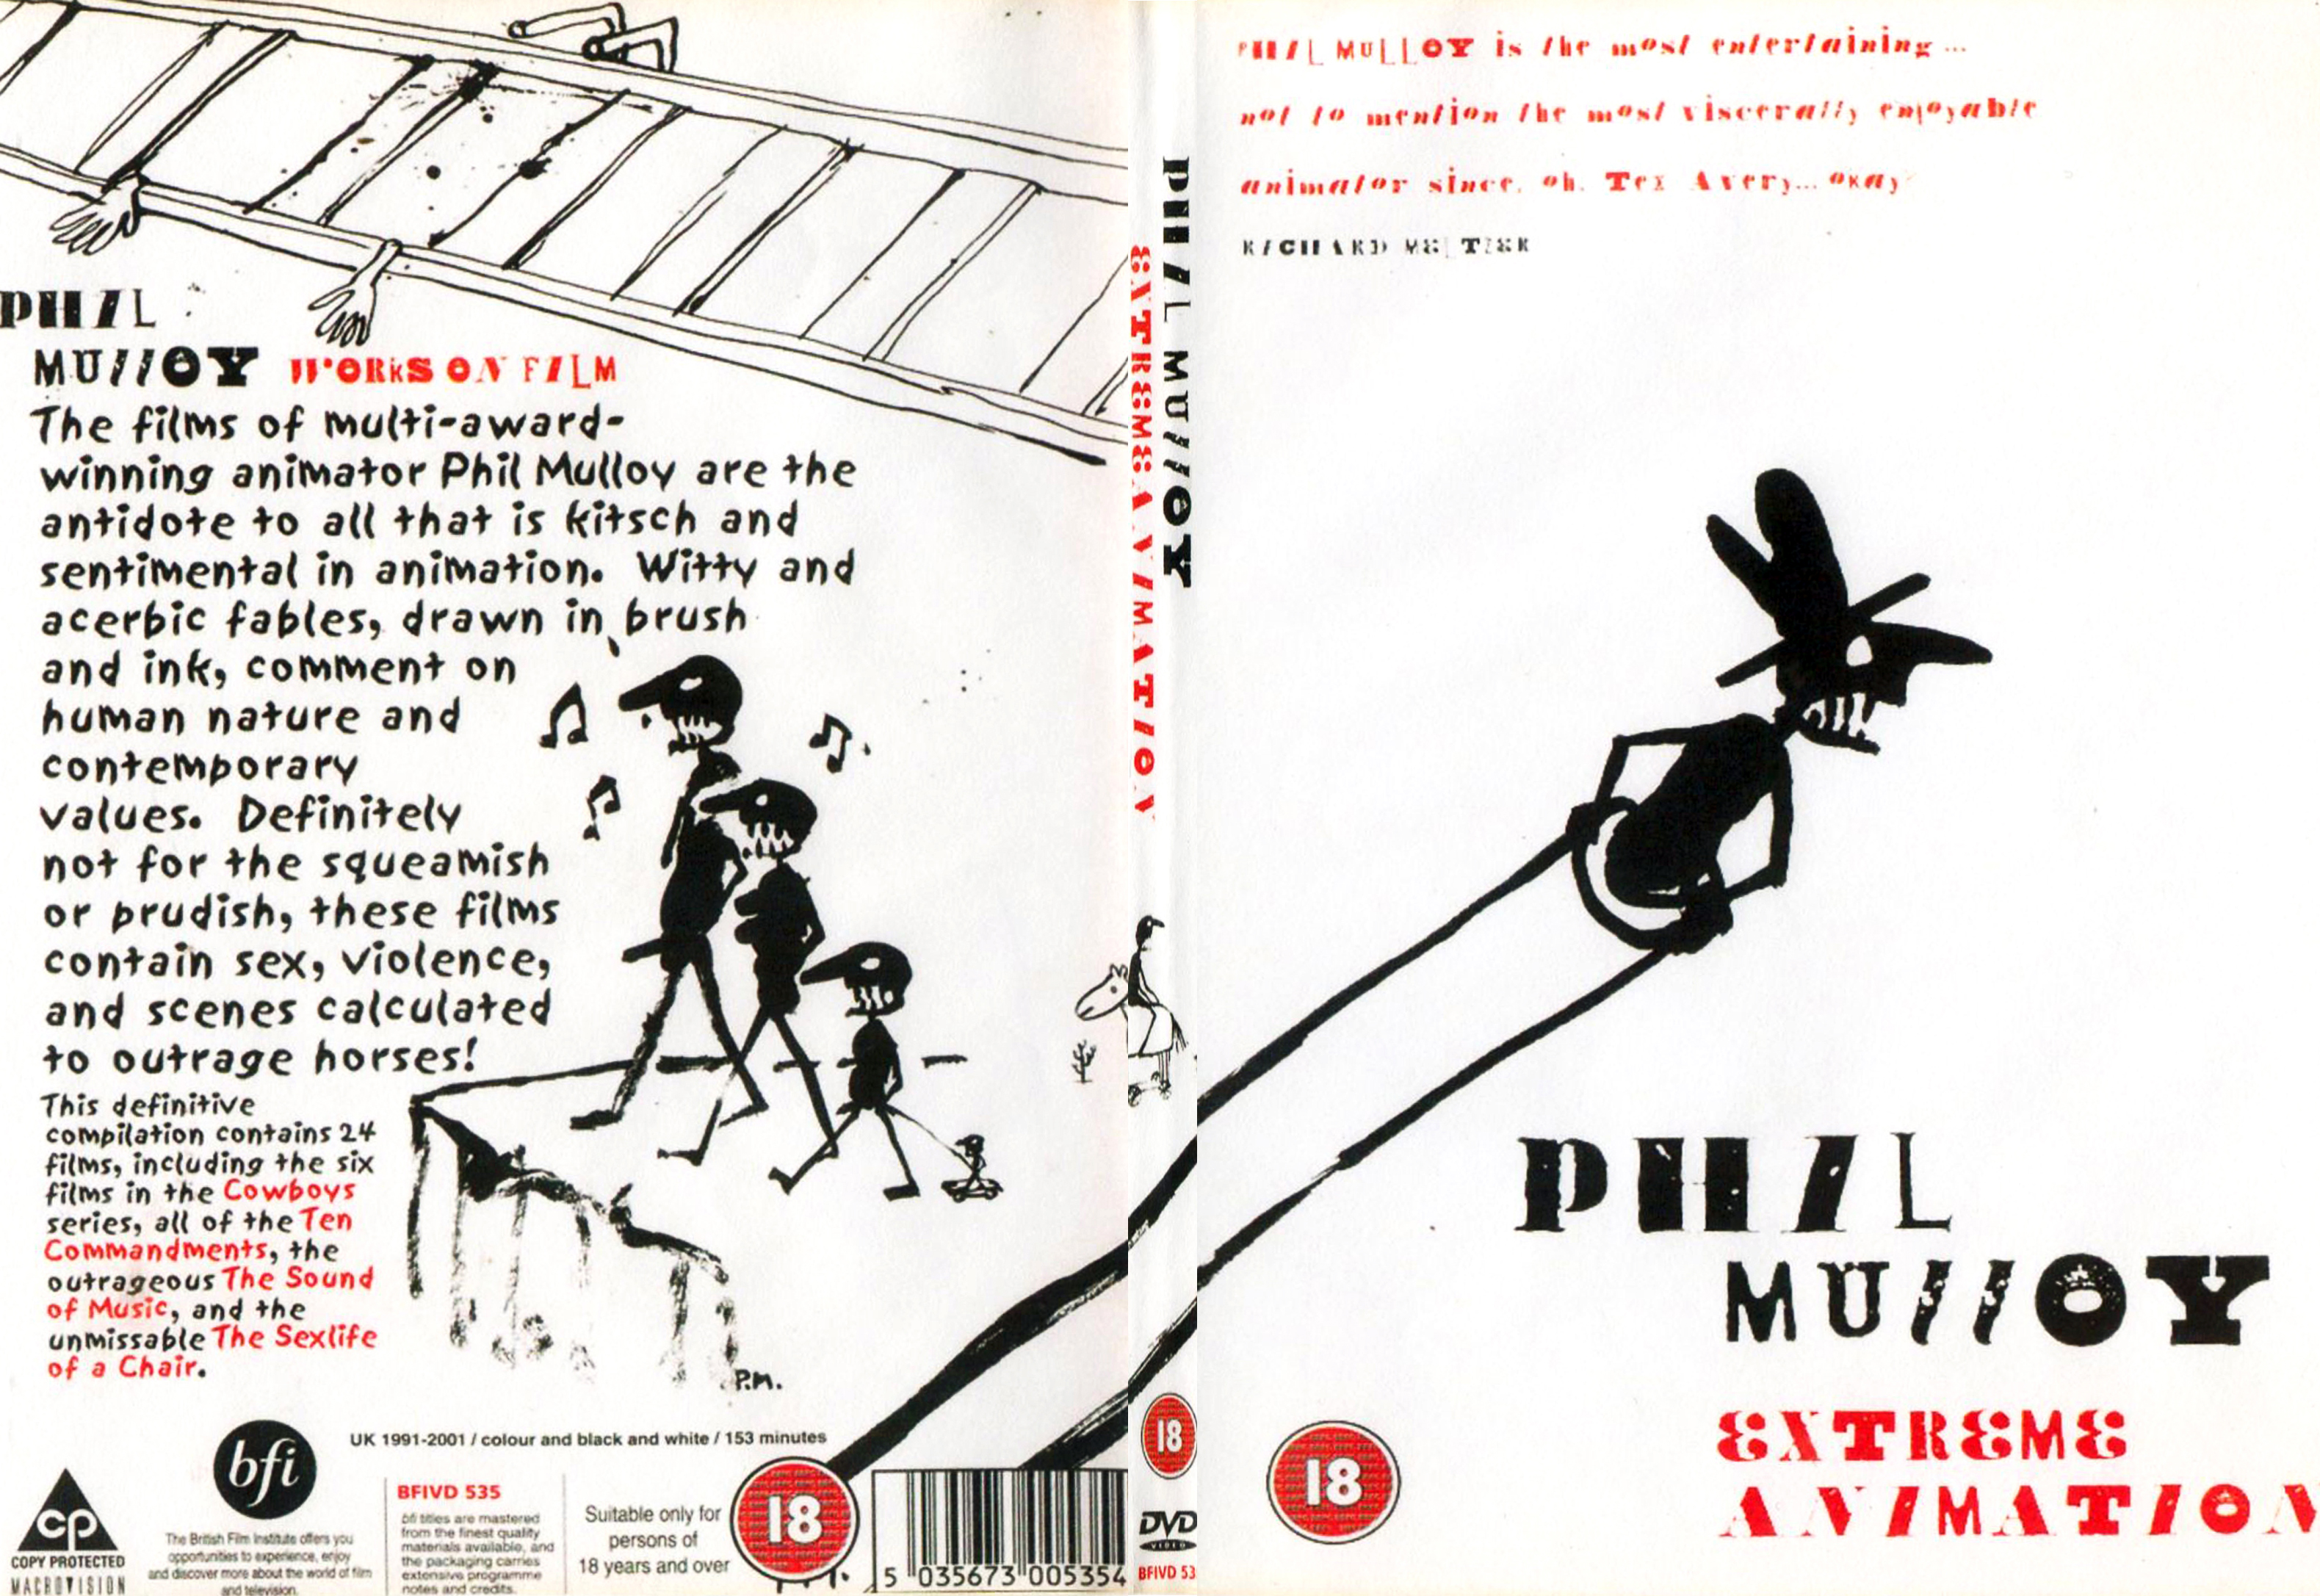 Jaquette DVD Phil Mullroy Extreme animation - SLIM